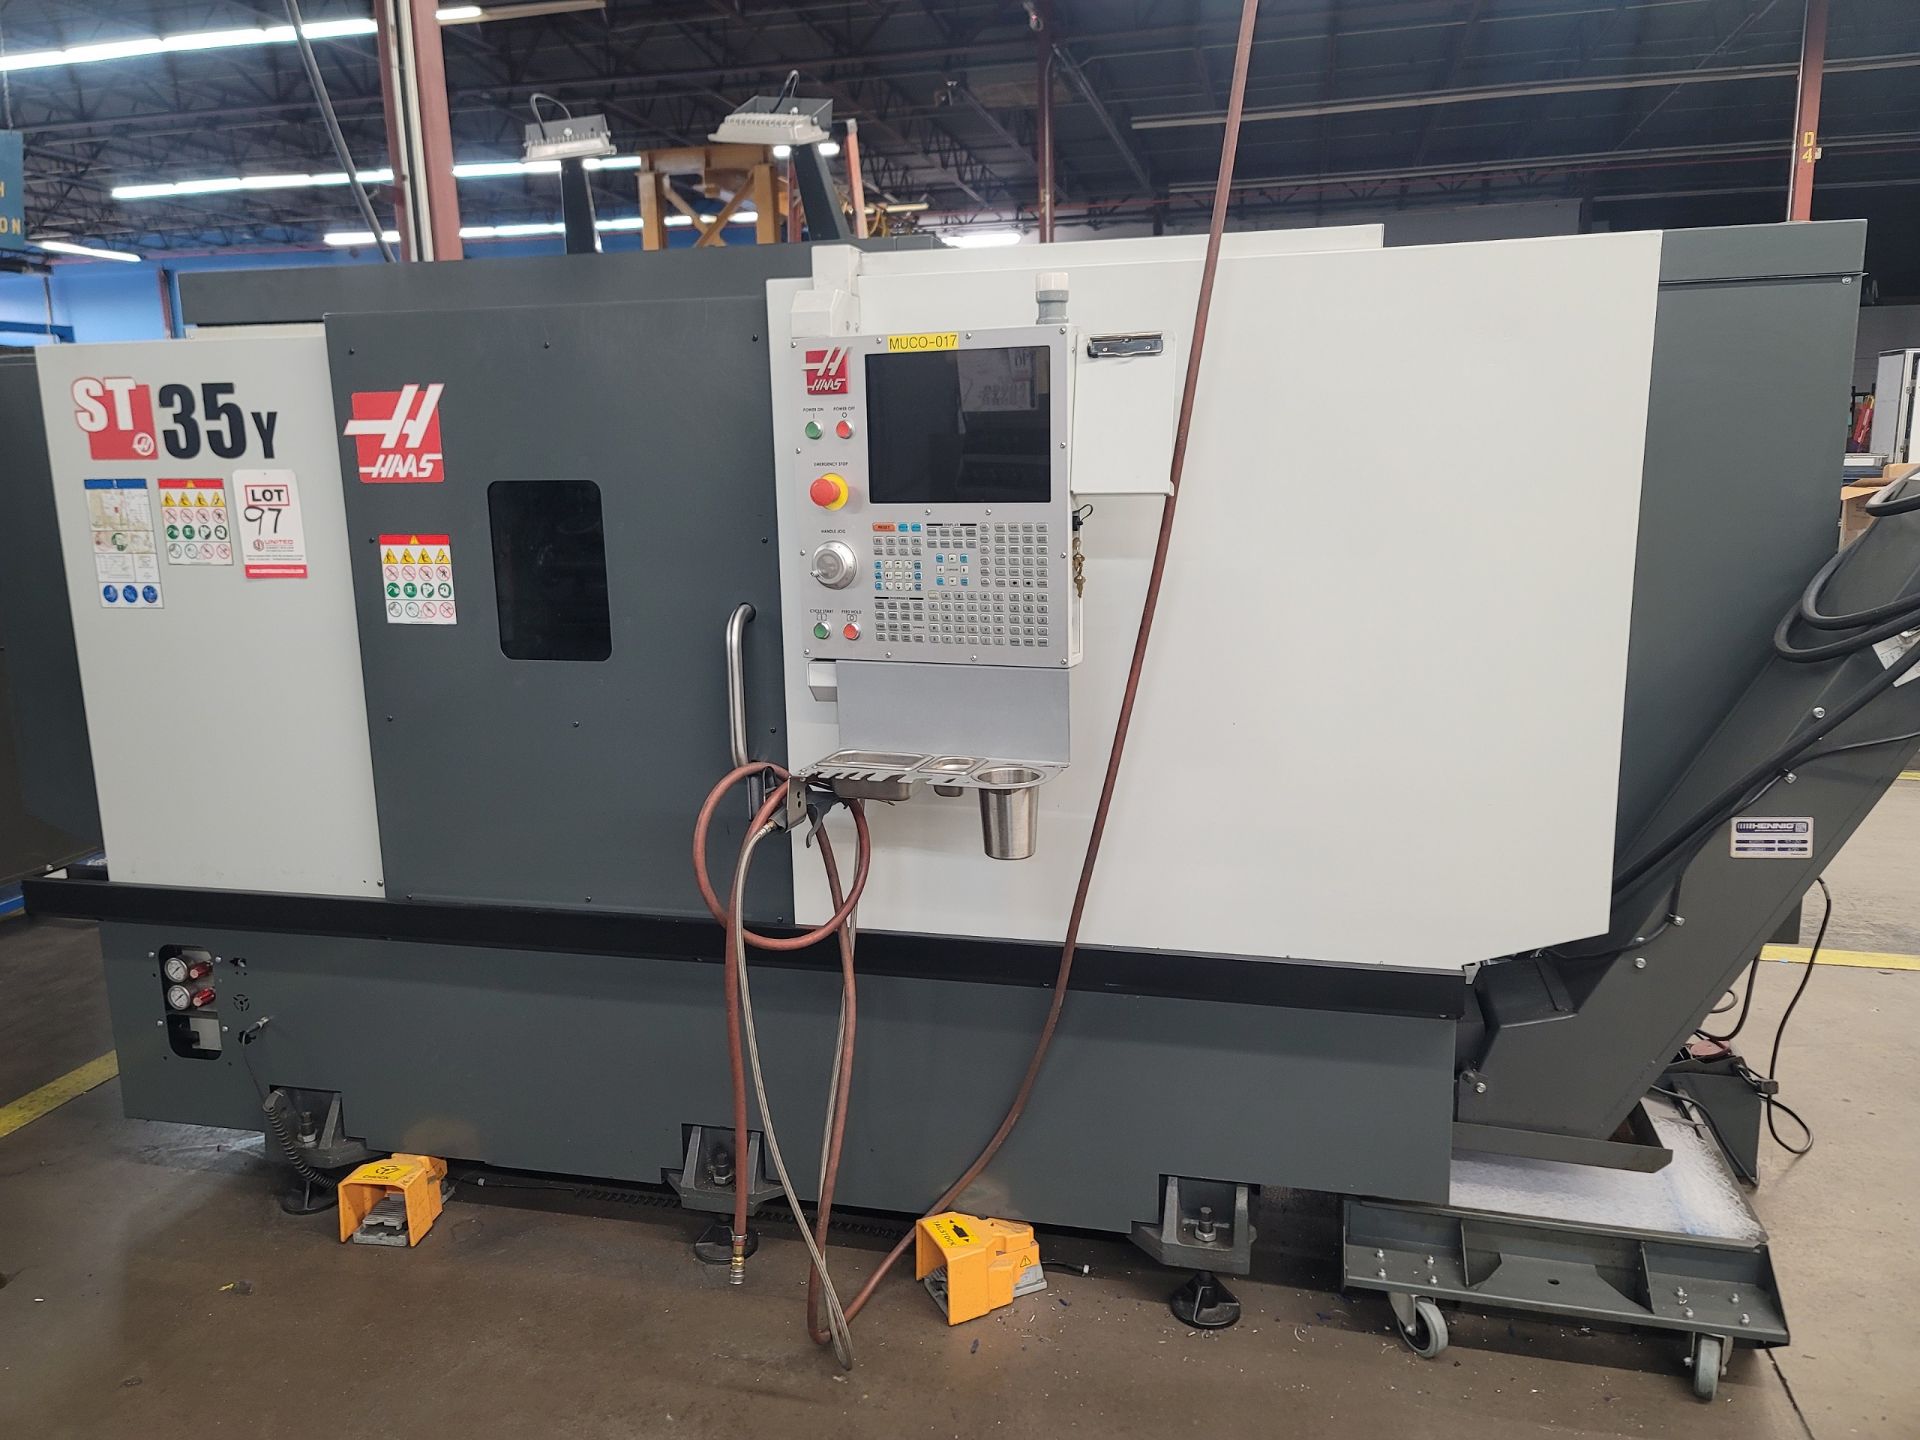 2021 HAAS ST-35Y CNC TURNING CENTER, LIVE MILLING, 12" CHUCK, MAX PART SWING 21"